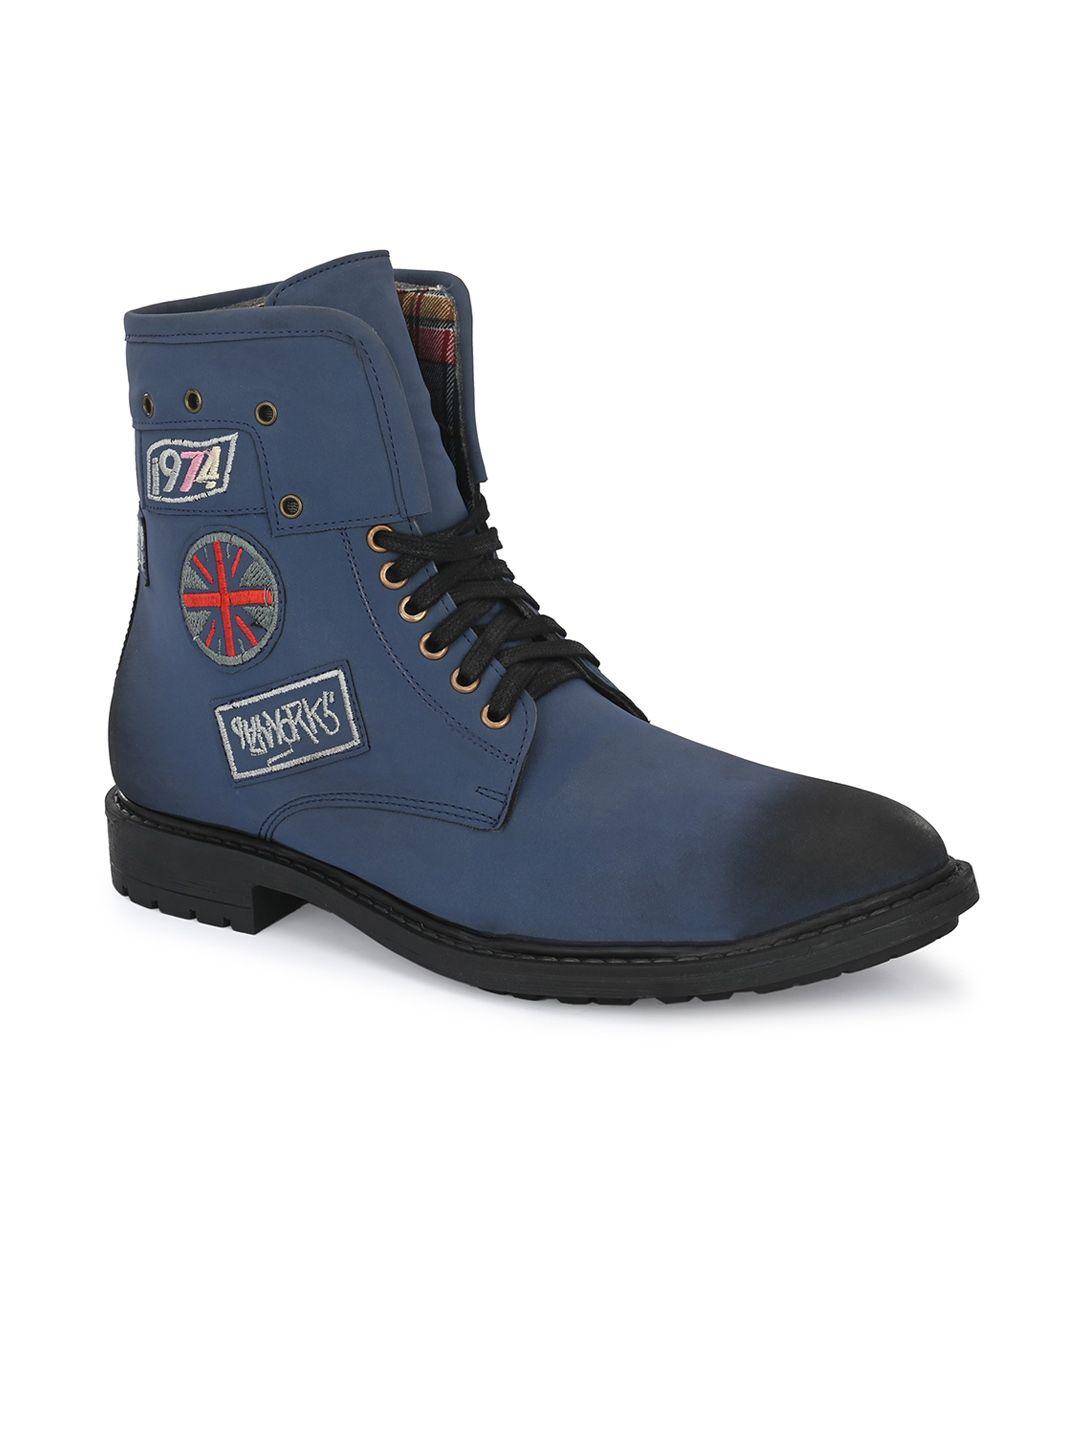 eego italy men embroidered high-top regular boots